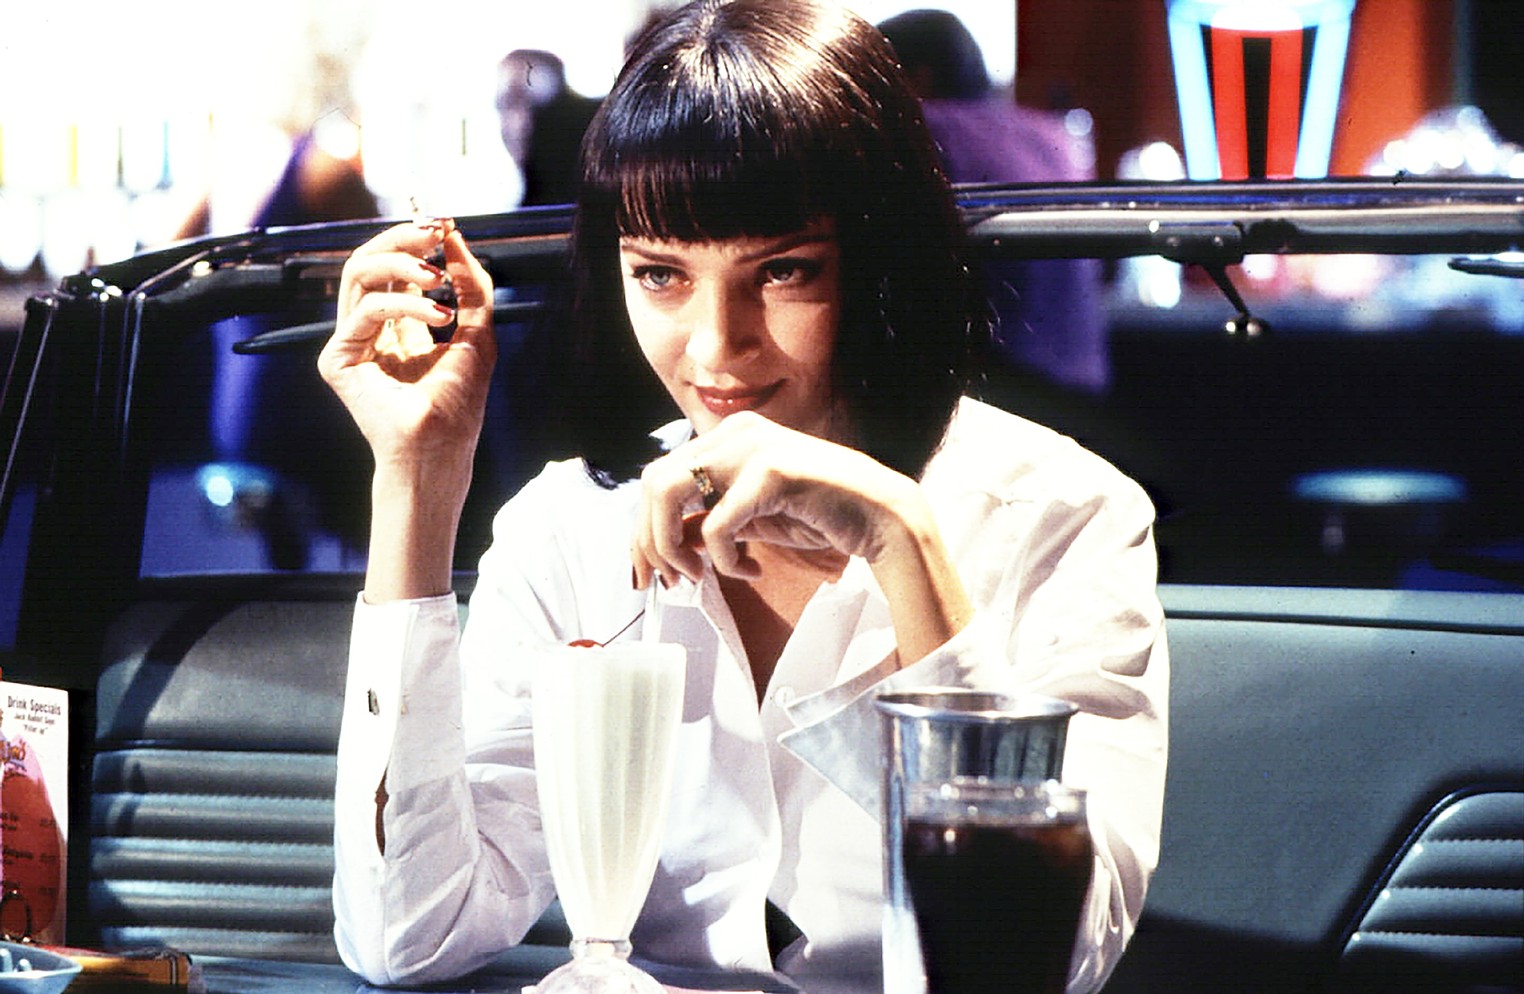 Pulp Fiction-Themed Bar Coming in March — Here's What We Know | Phoenix New Times